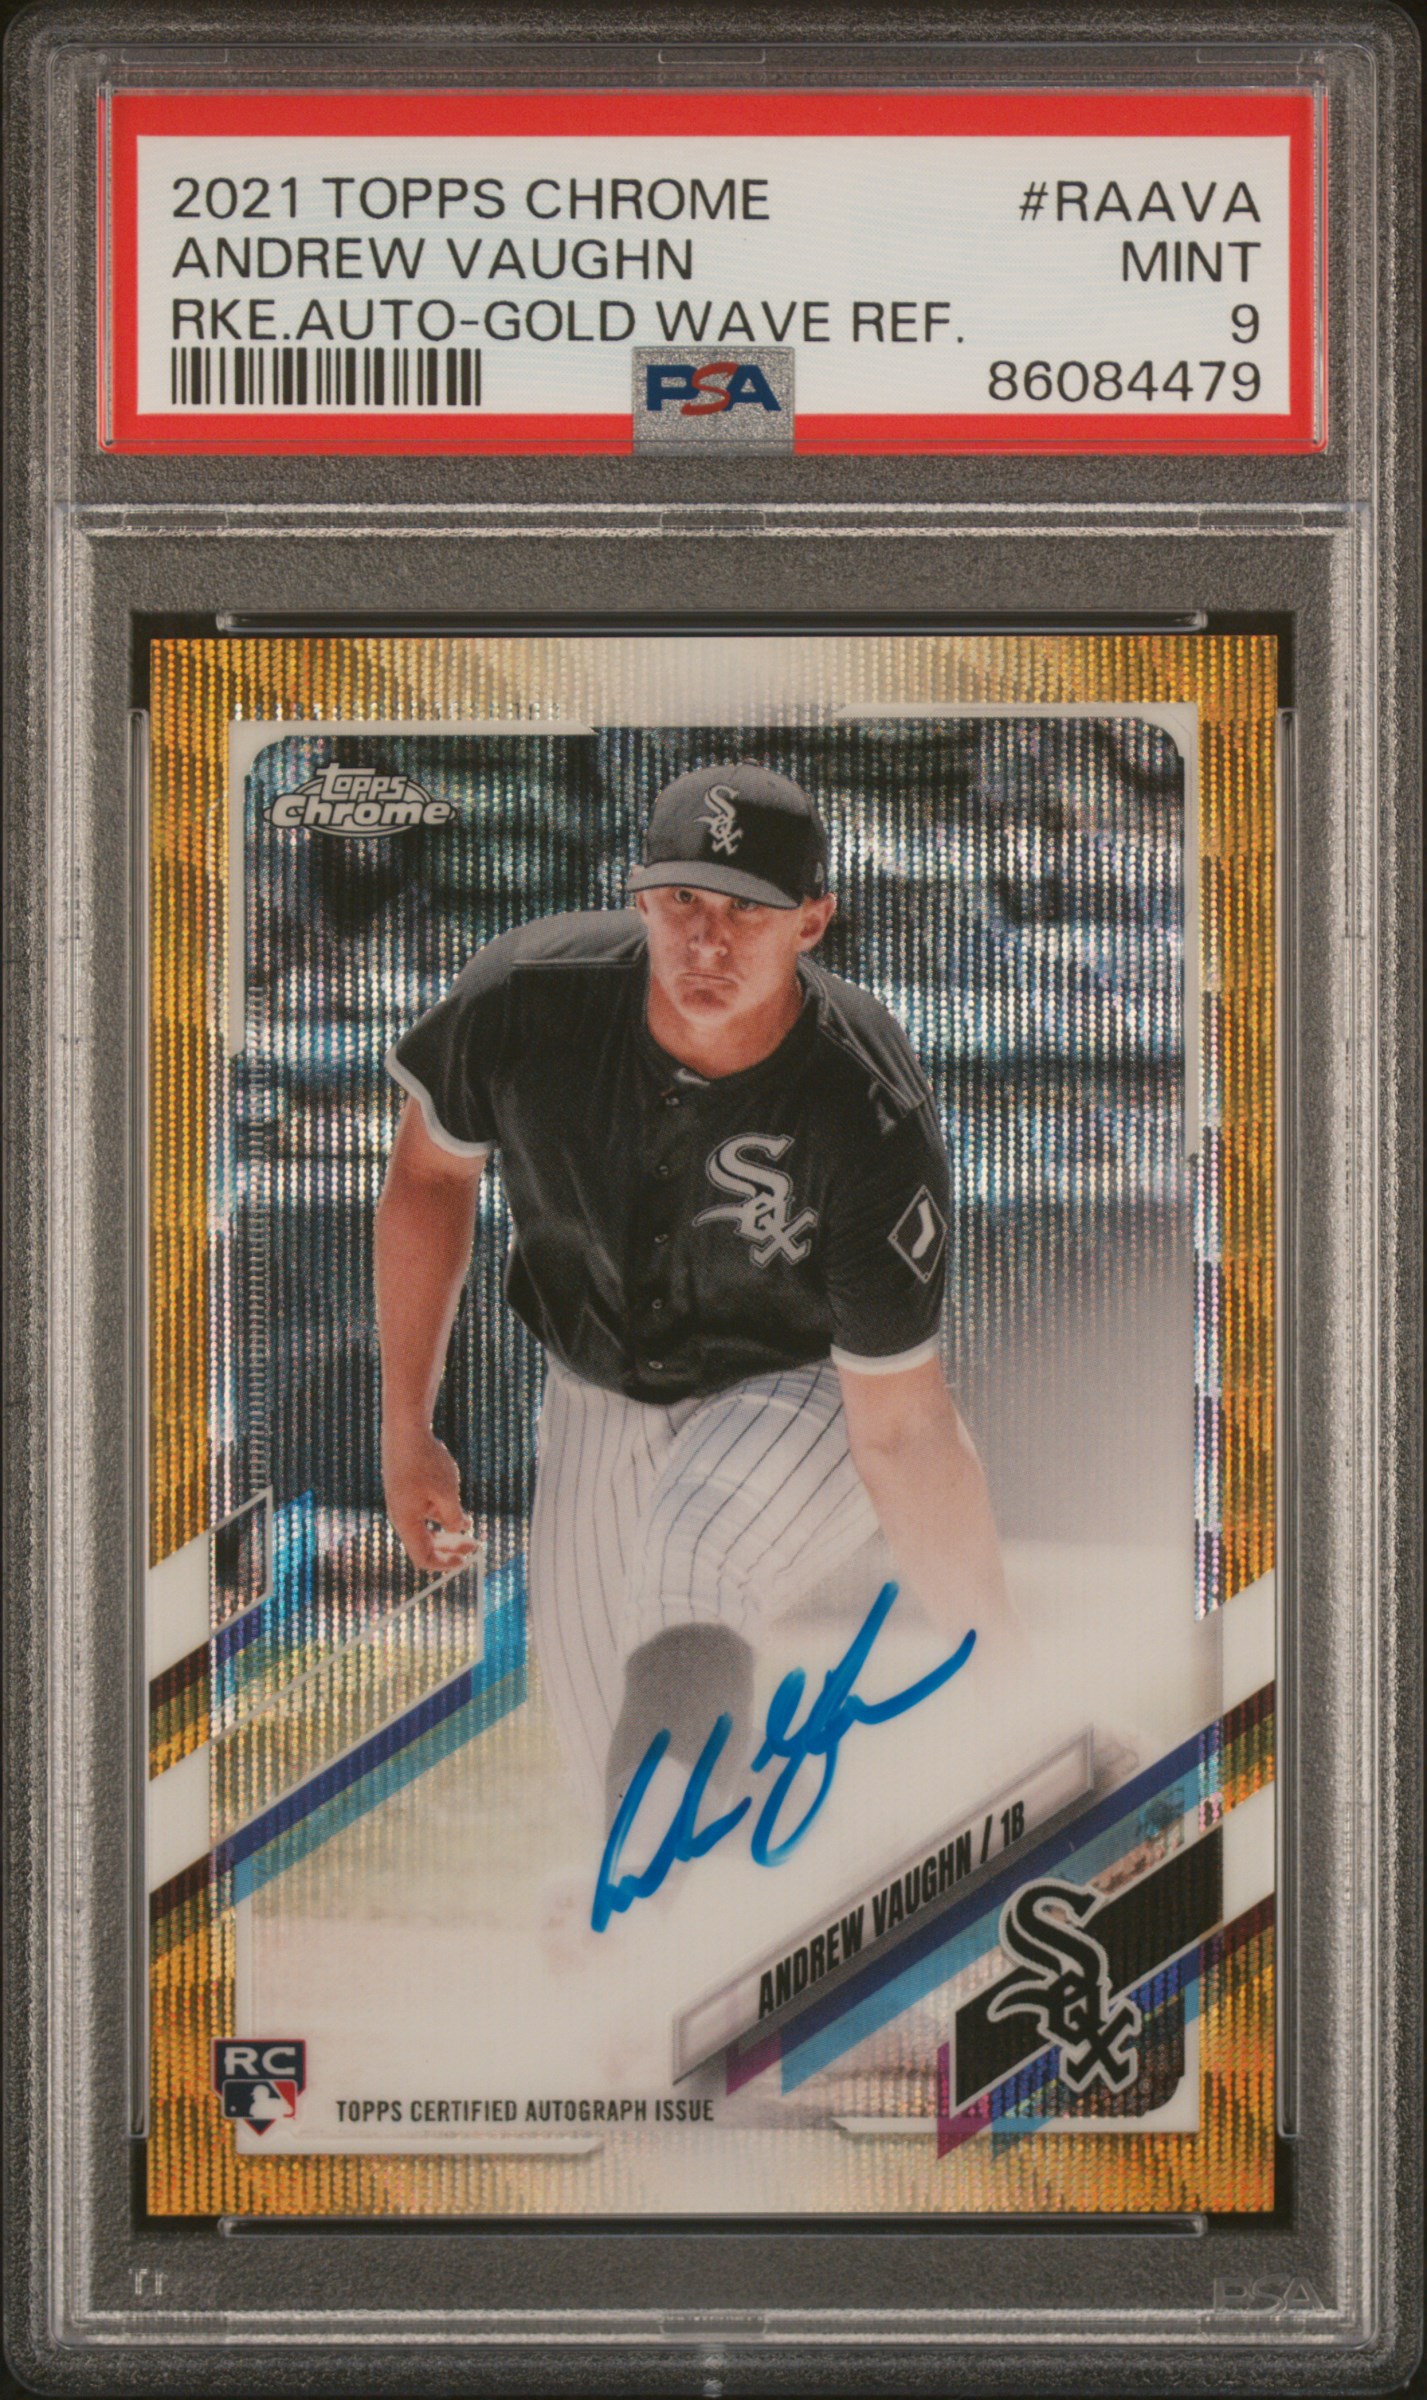 2021 Topps Chrome Rookie Autographs Gold Wave Refractor #RA-AVA Andrew Vaughn Signed Rookie Card (#45/50) – PSA MINT 9